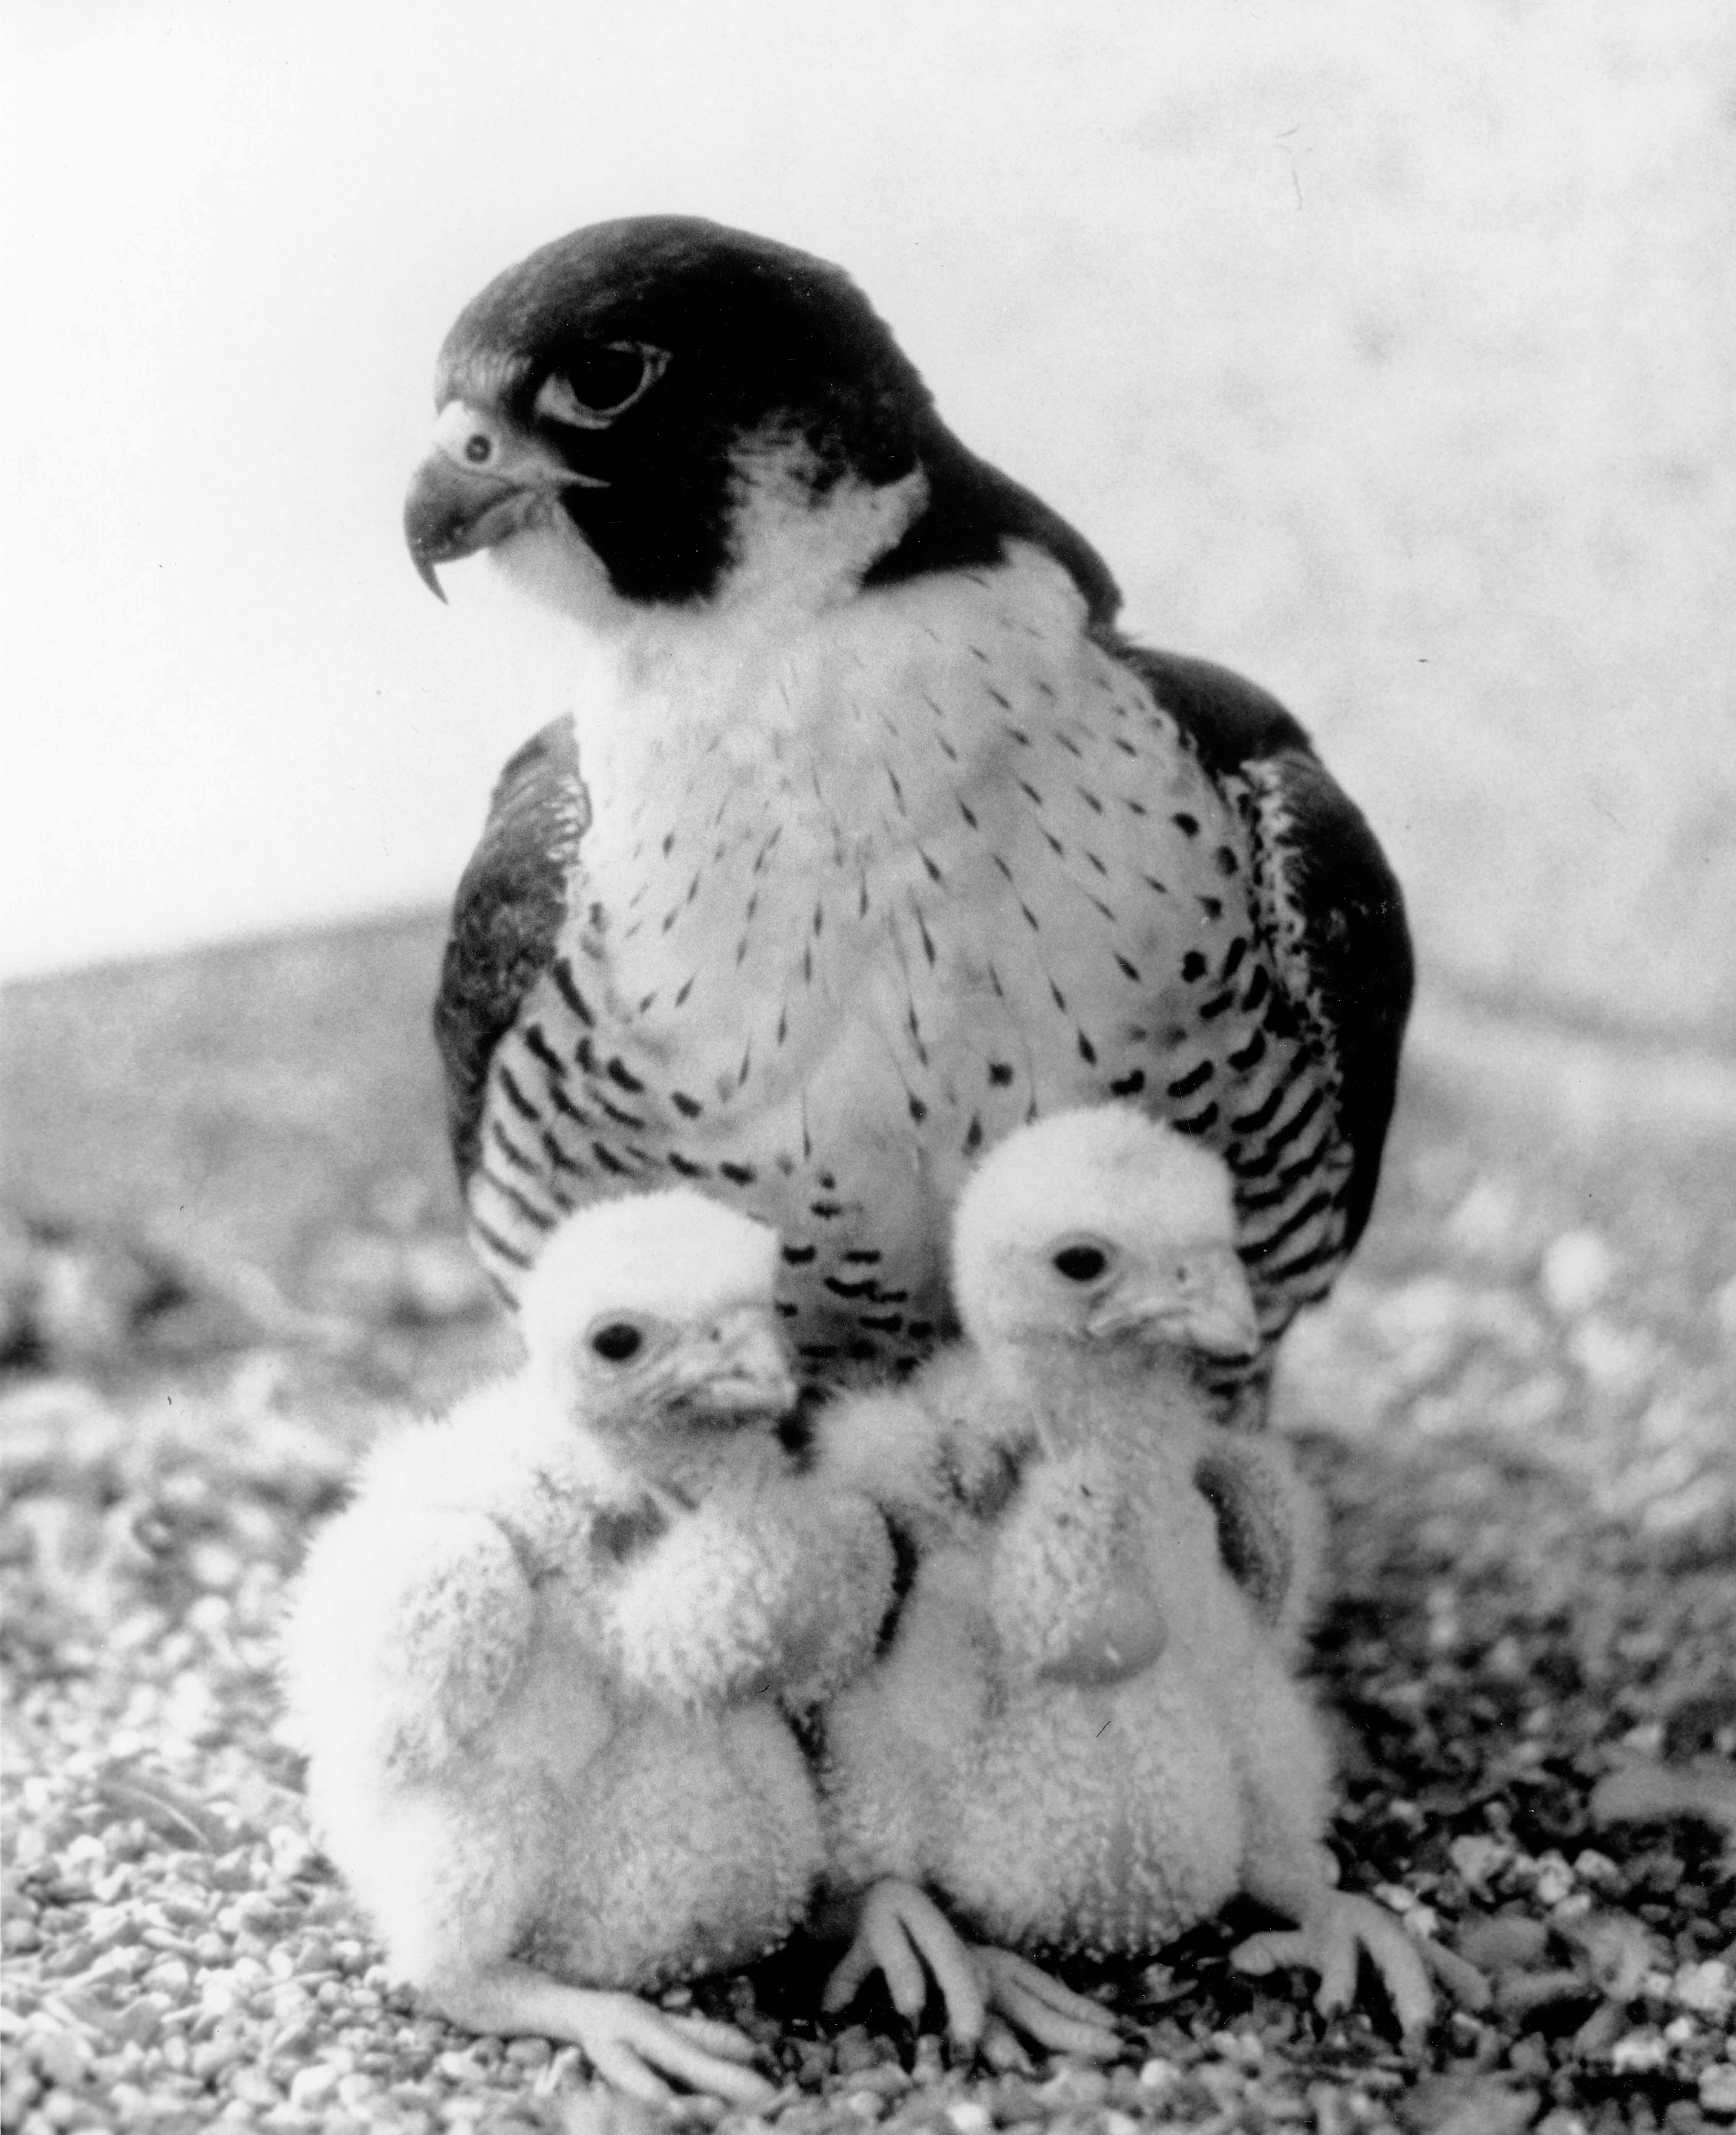 A peregrine falcon with chicks.